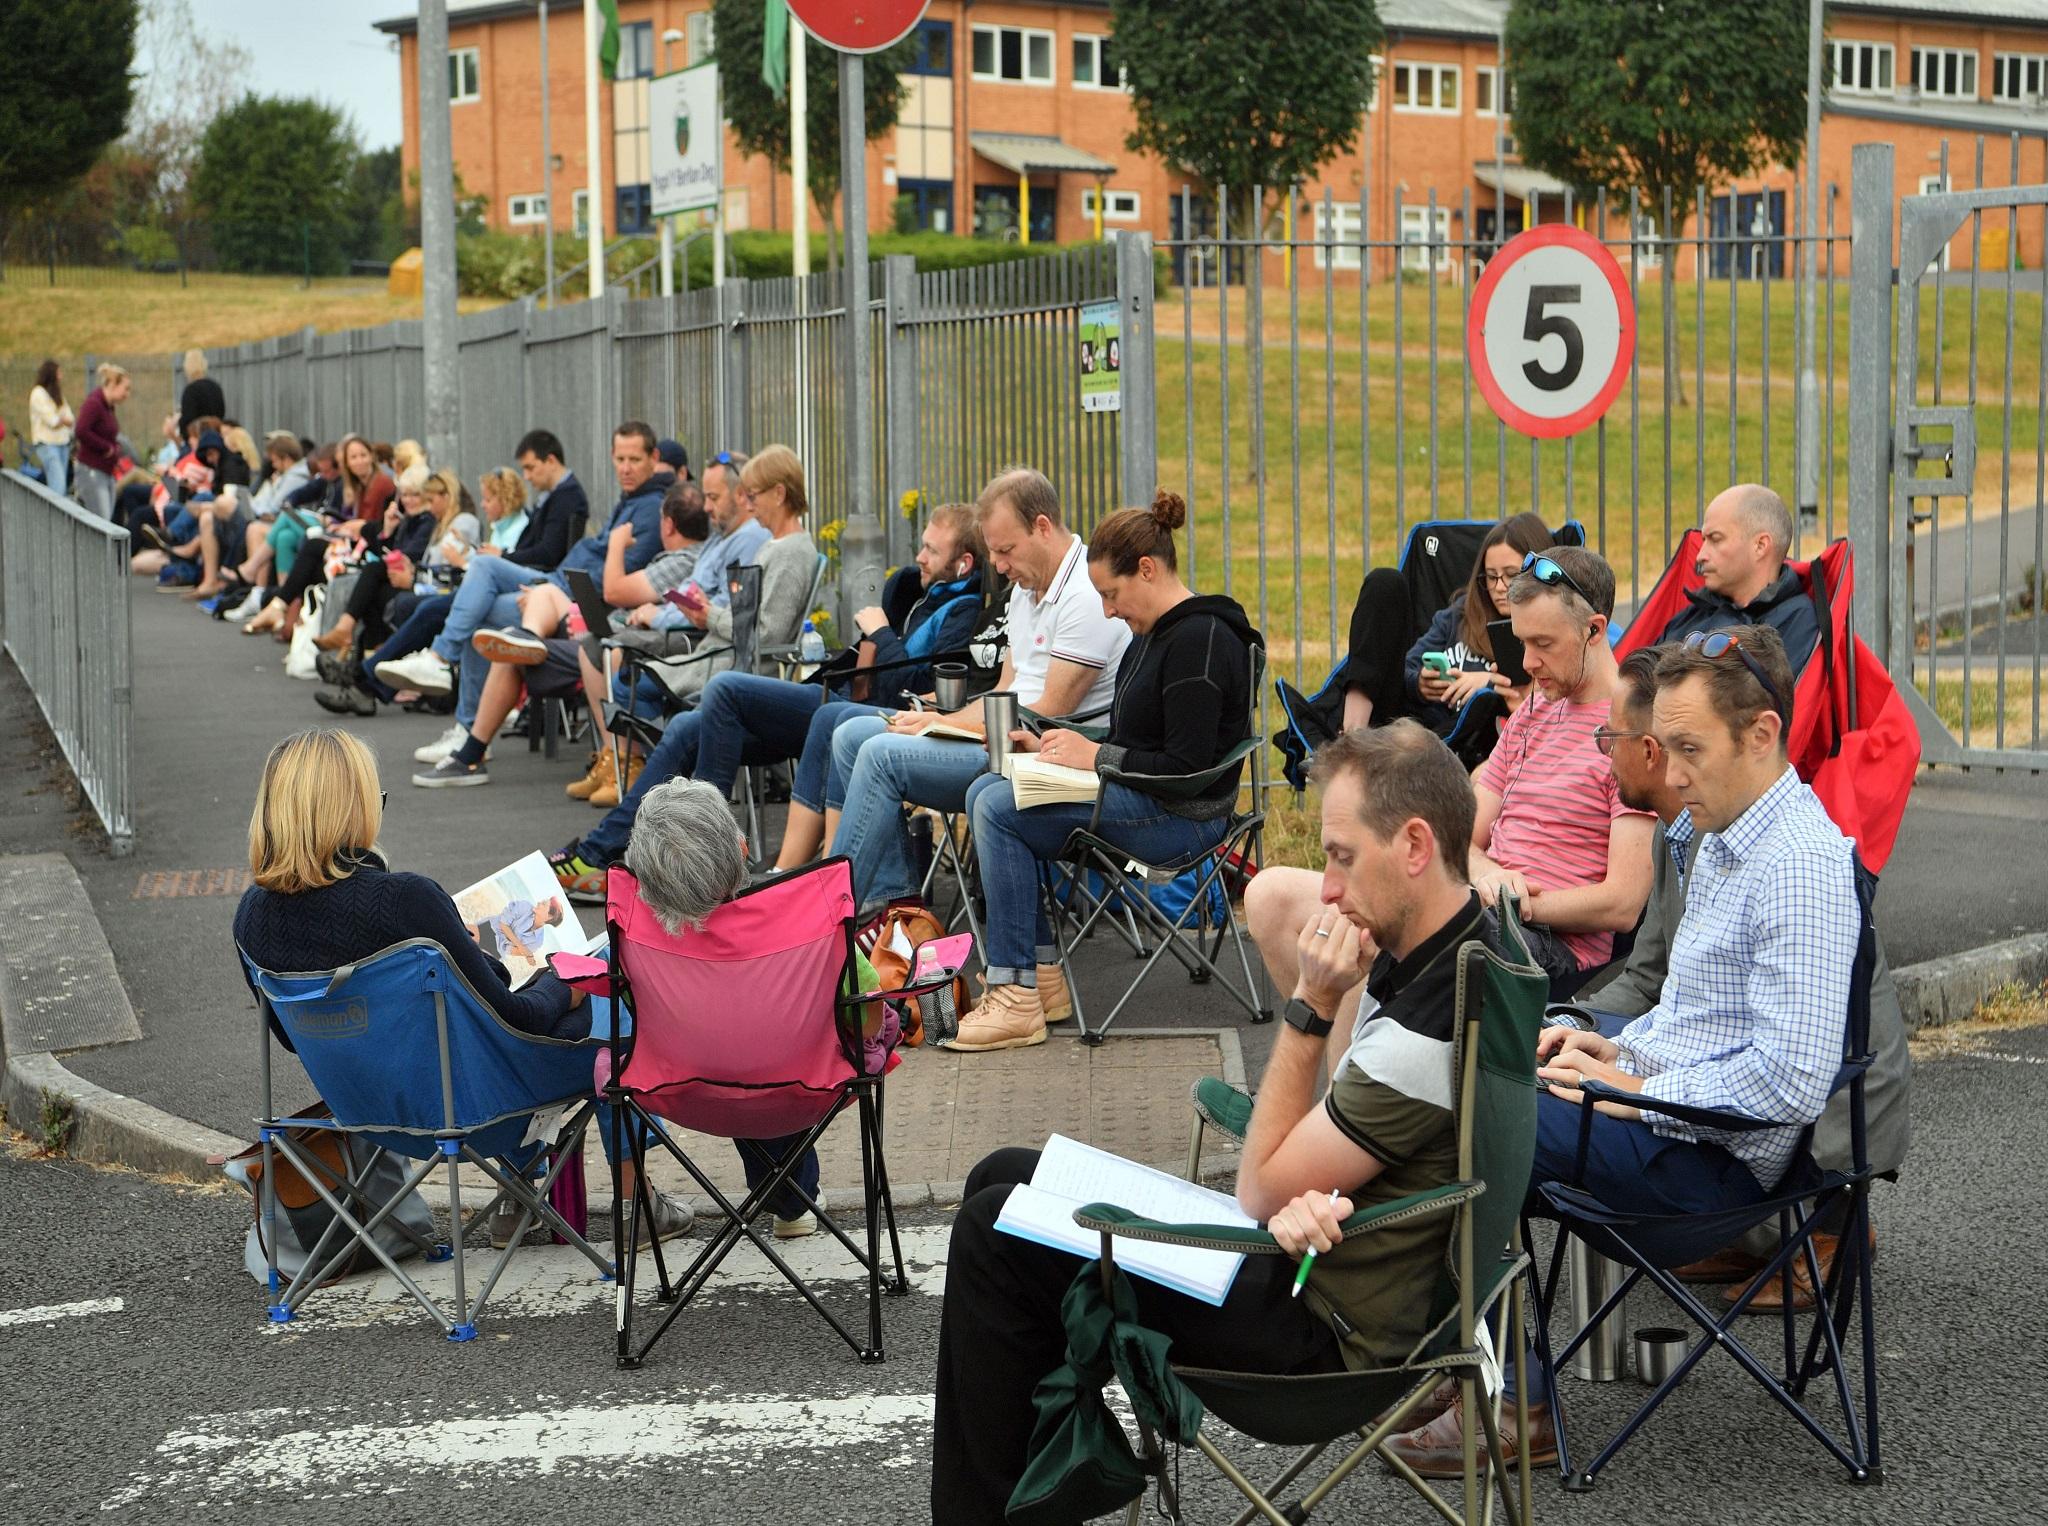 Parents queued outside a primary school in Wales to secure a breakfast club place